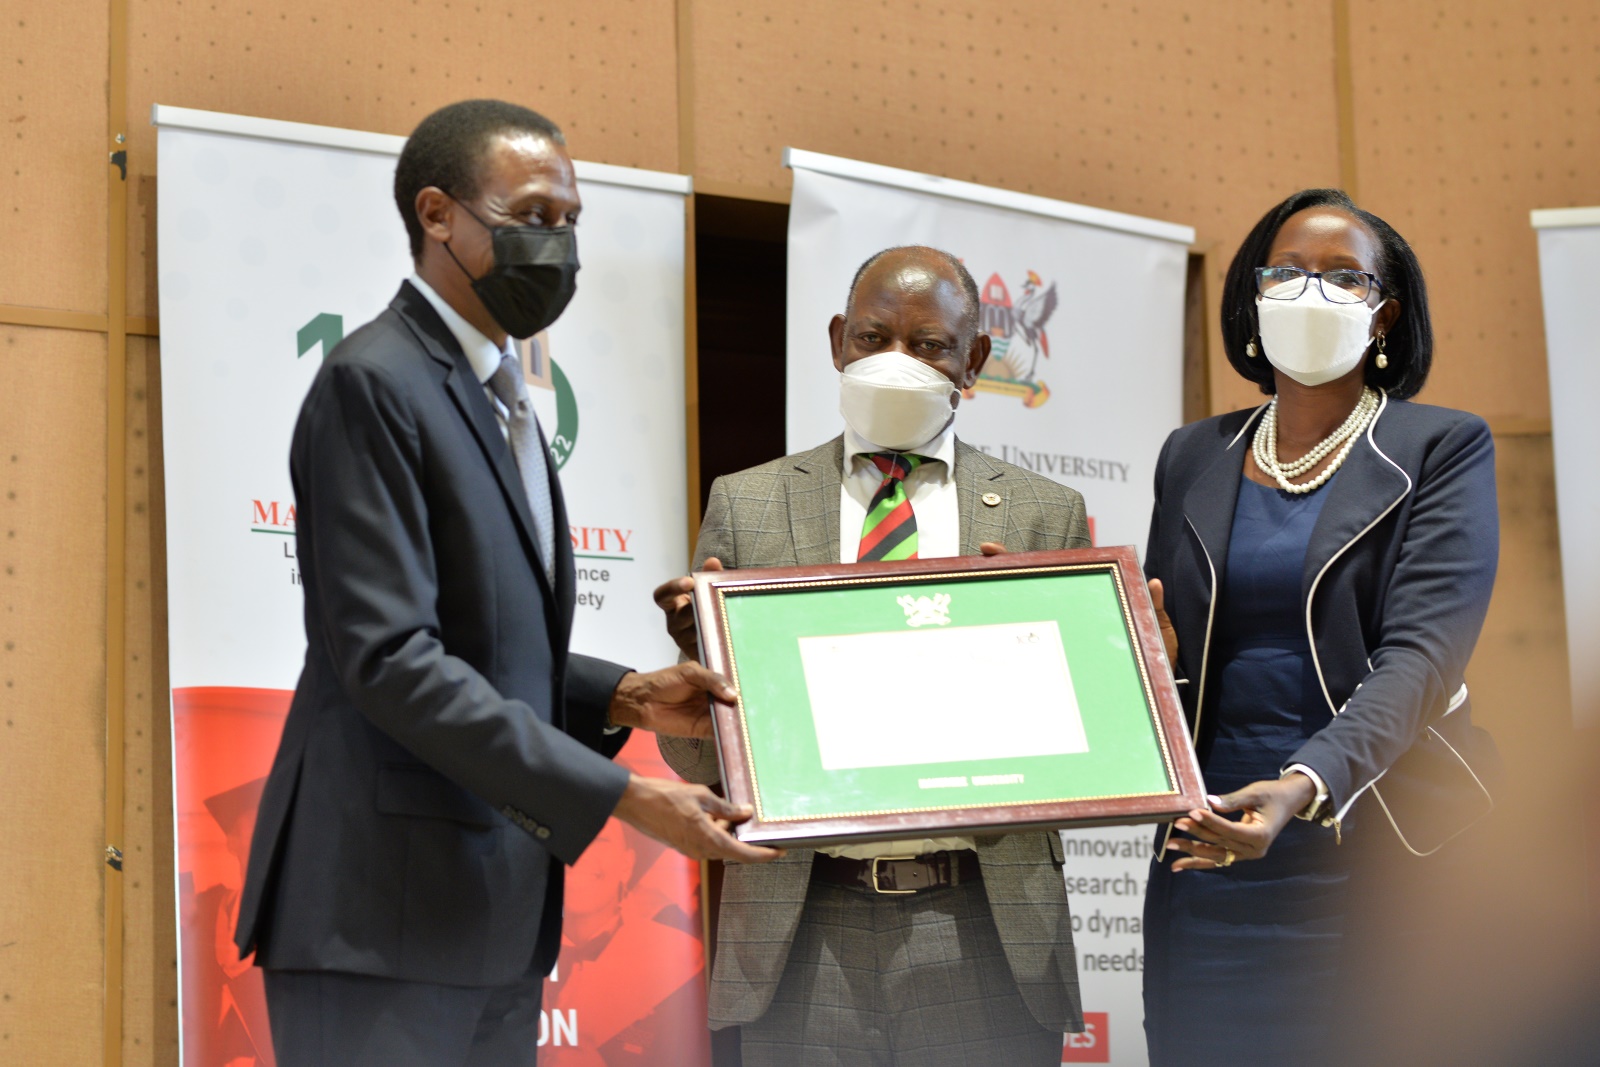 The Attorney General, Hon. Kiryowa Kiwanuka (L) receives his Eminent Service Award from Council Chairperson, Mrs. Lorna Magara (R) and Vice Chancellor, Prof. Barnabas Nawangwe (C).